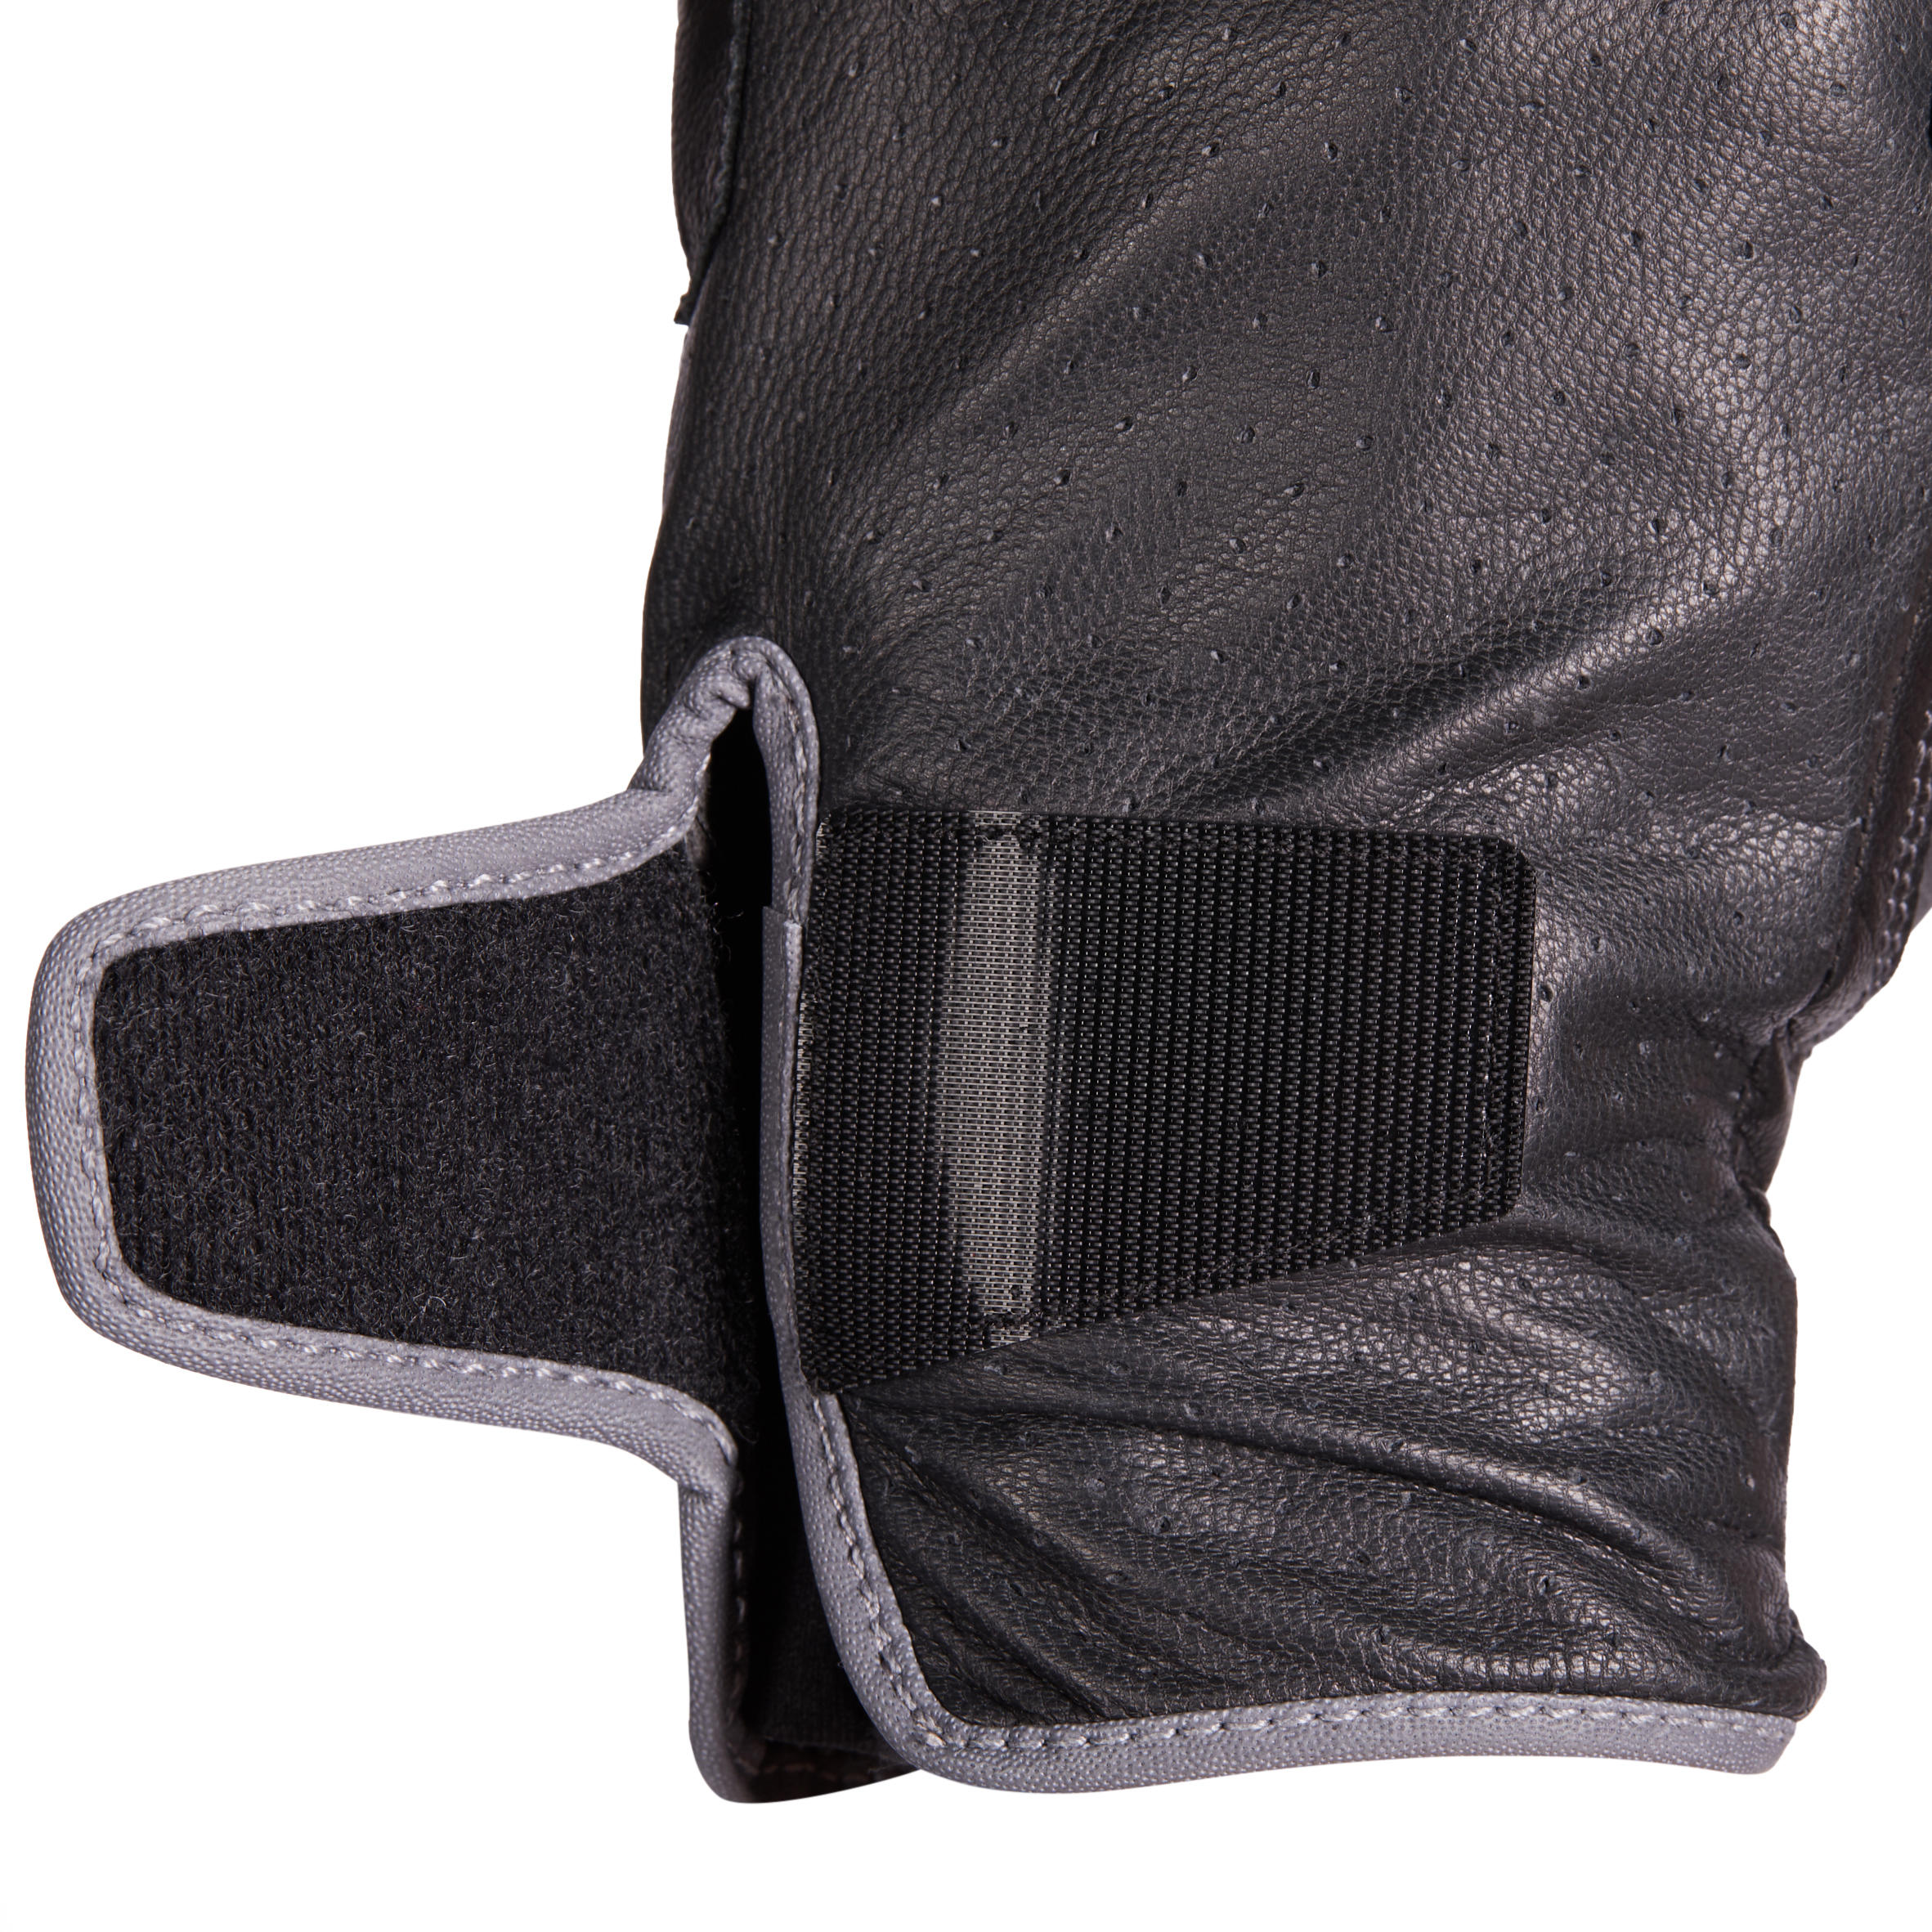 Women's Horse Riding Leather Gloves 900 - Black 5/7